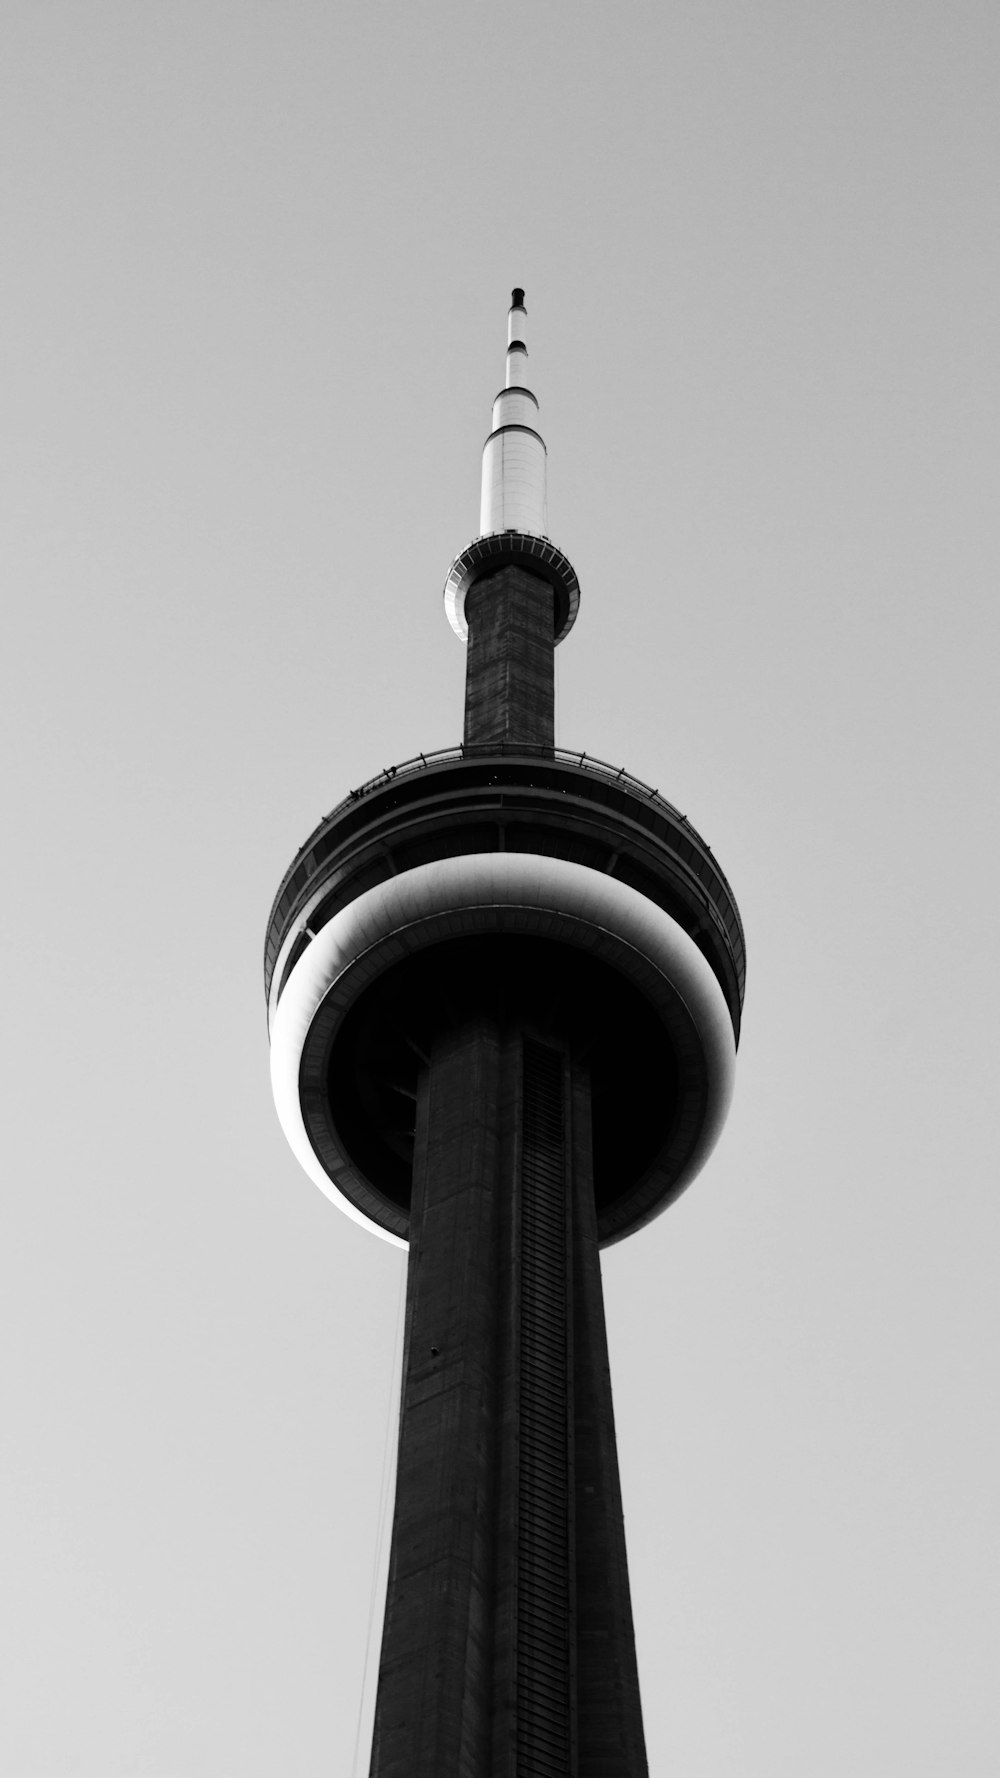 grayscale photography of tower